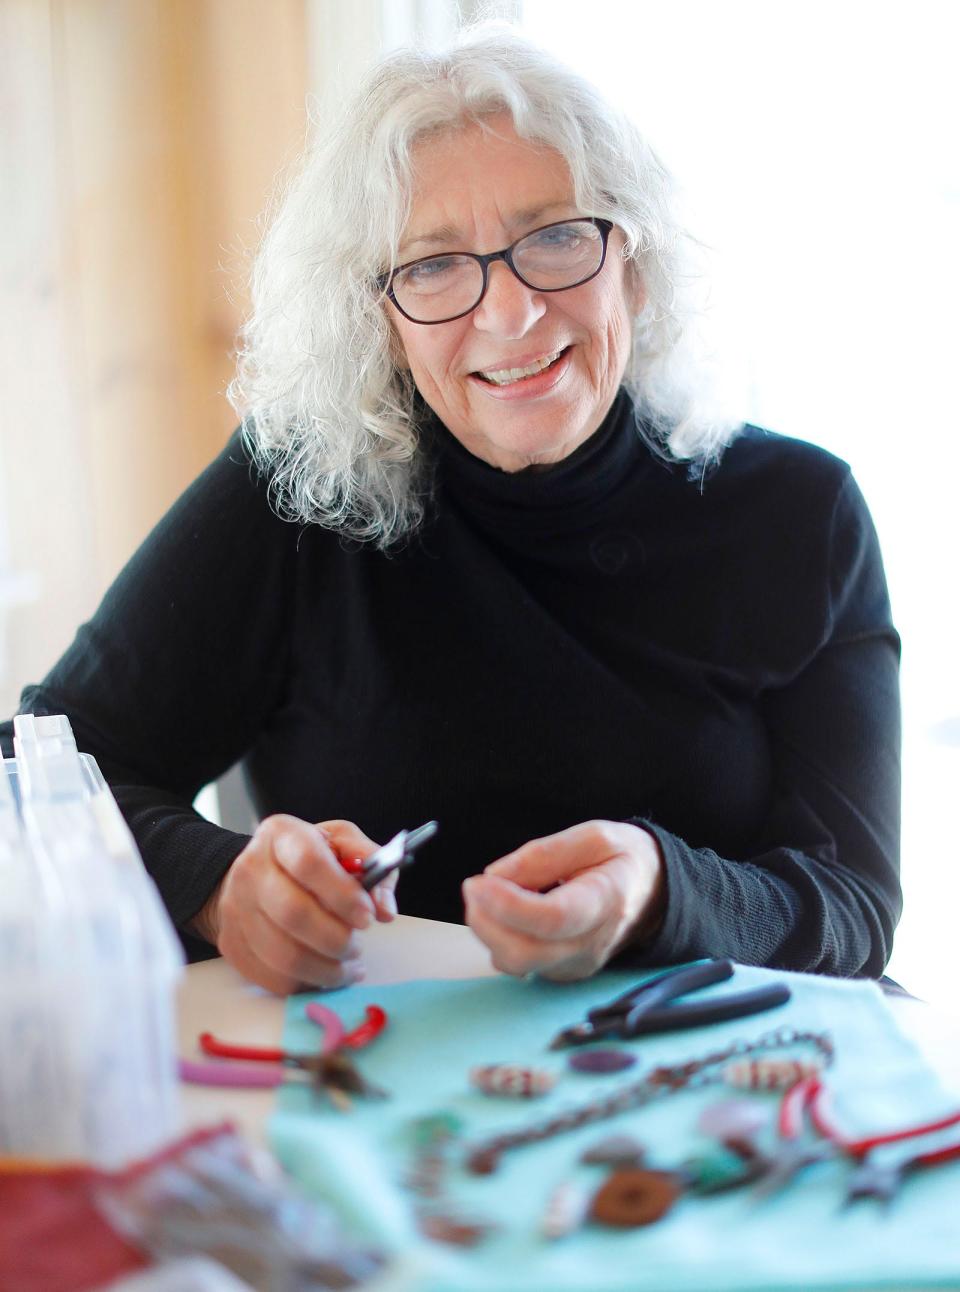 Linda Santoro likes to make jewelry. Her work is on display at the Quincy Art Association.